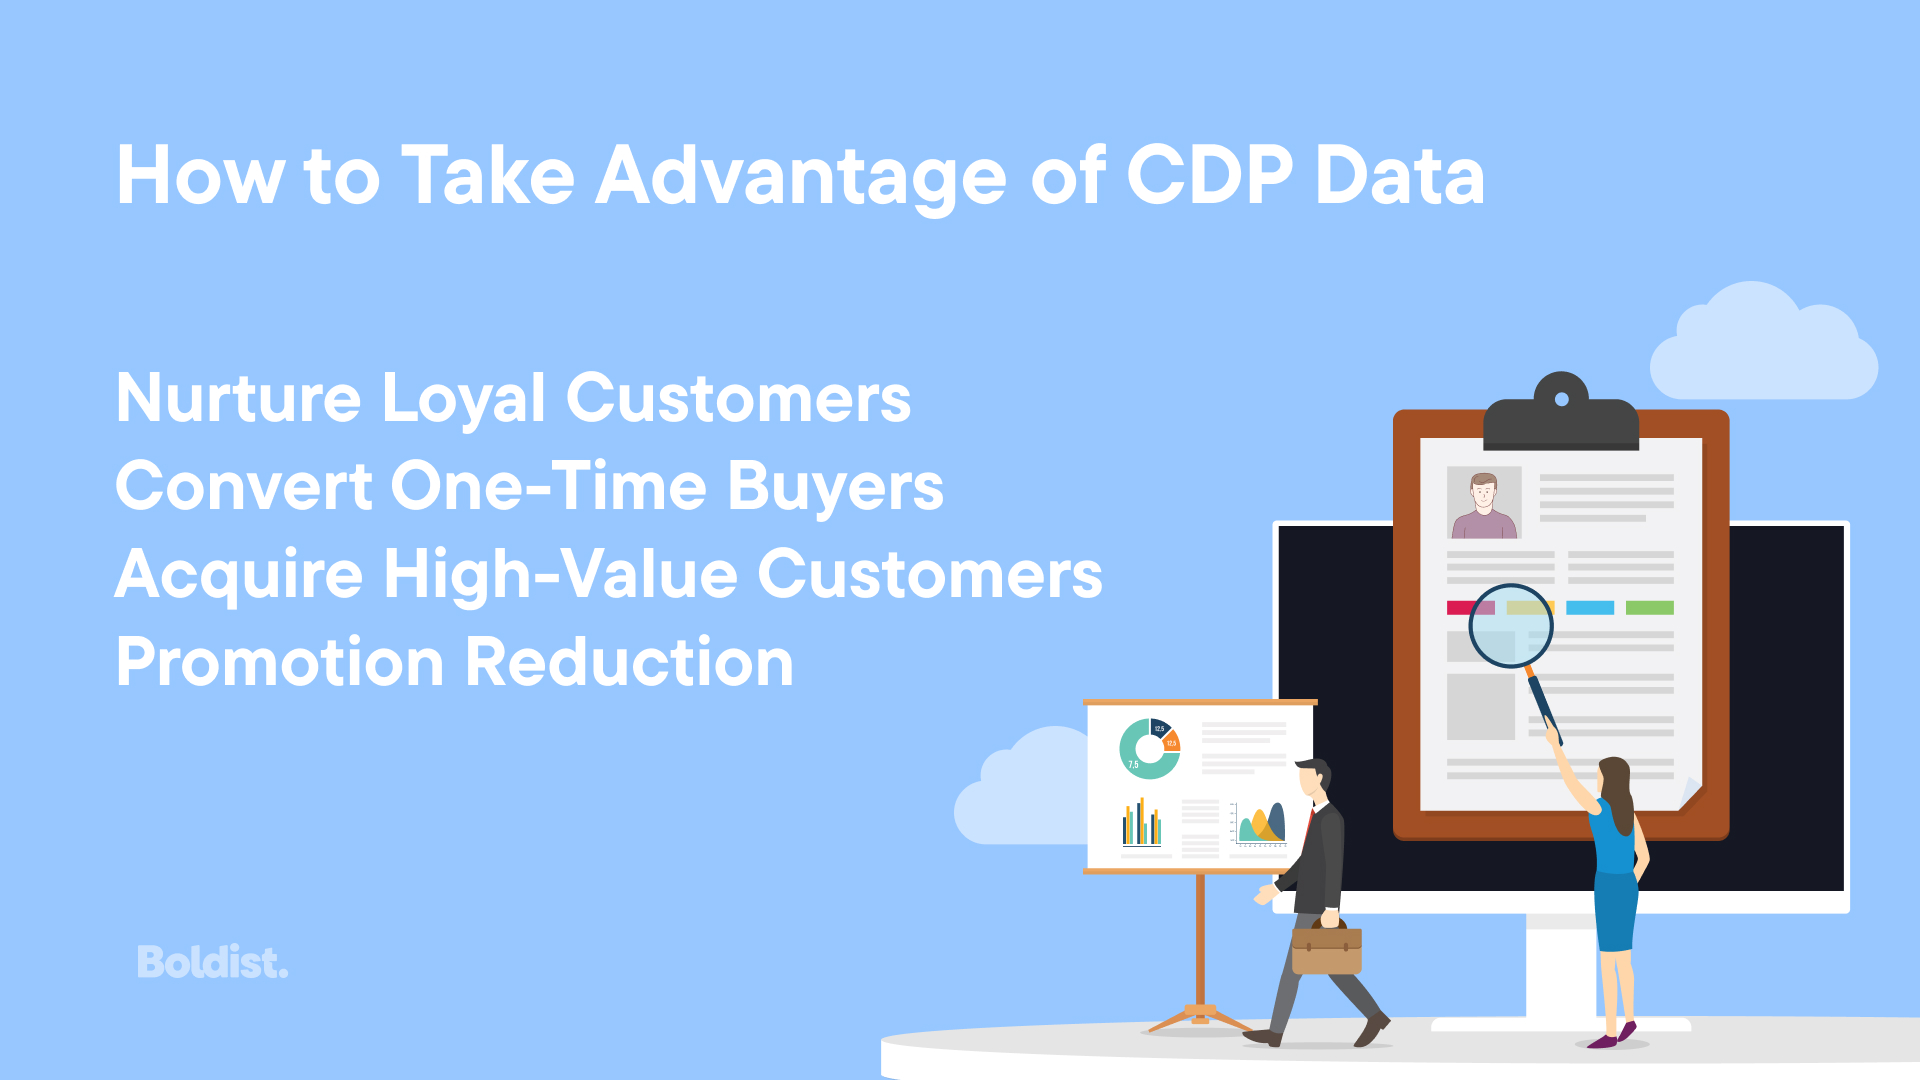 List of the 4 ways to use CDP data said above